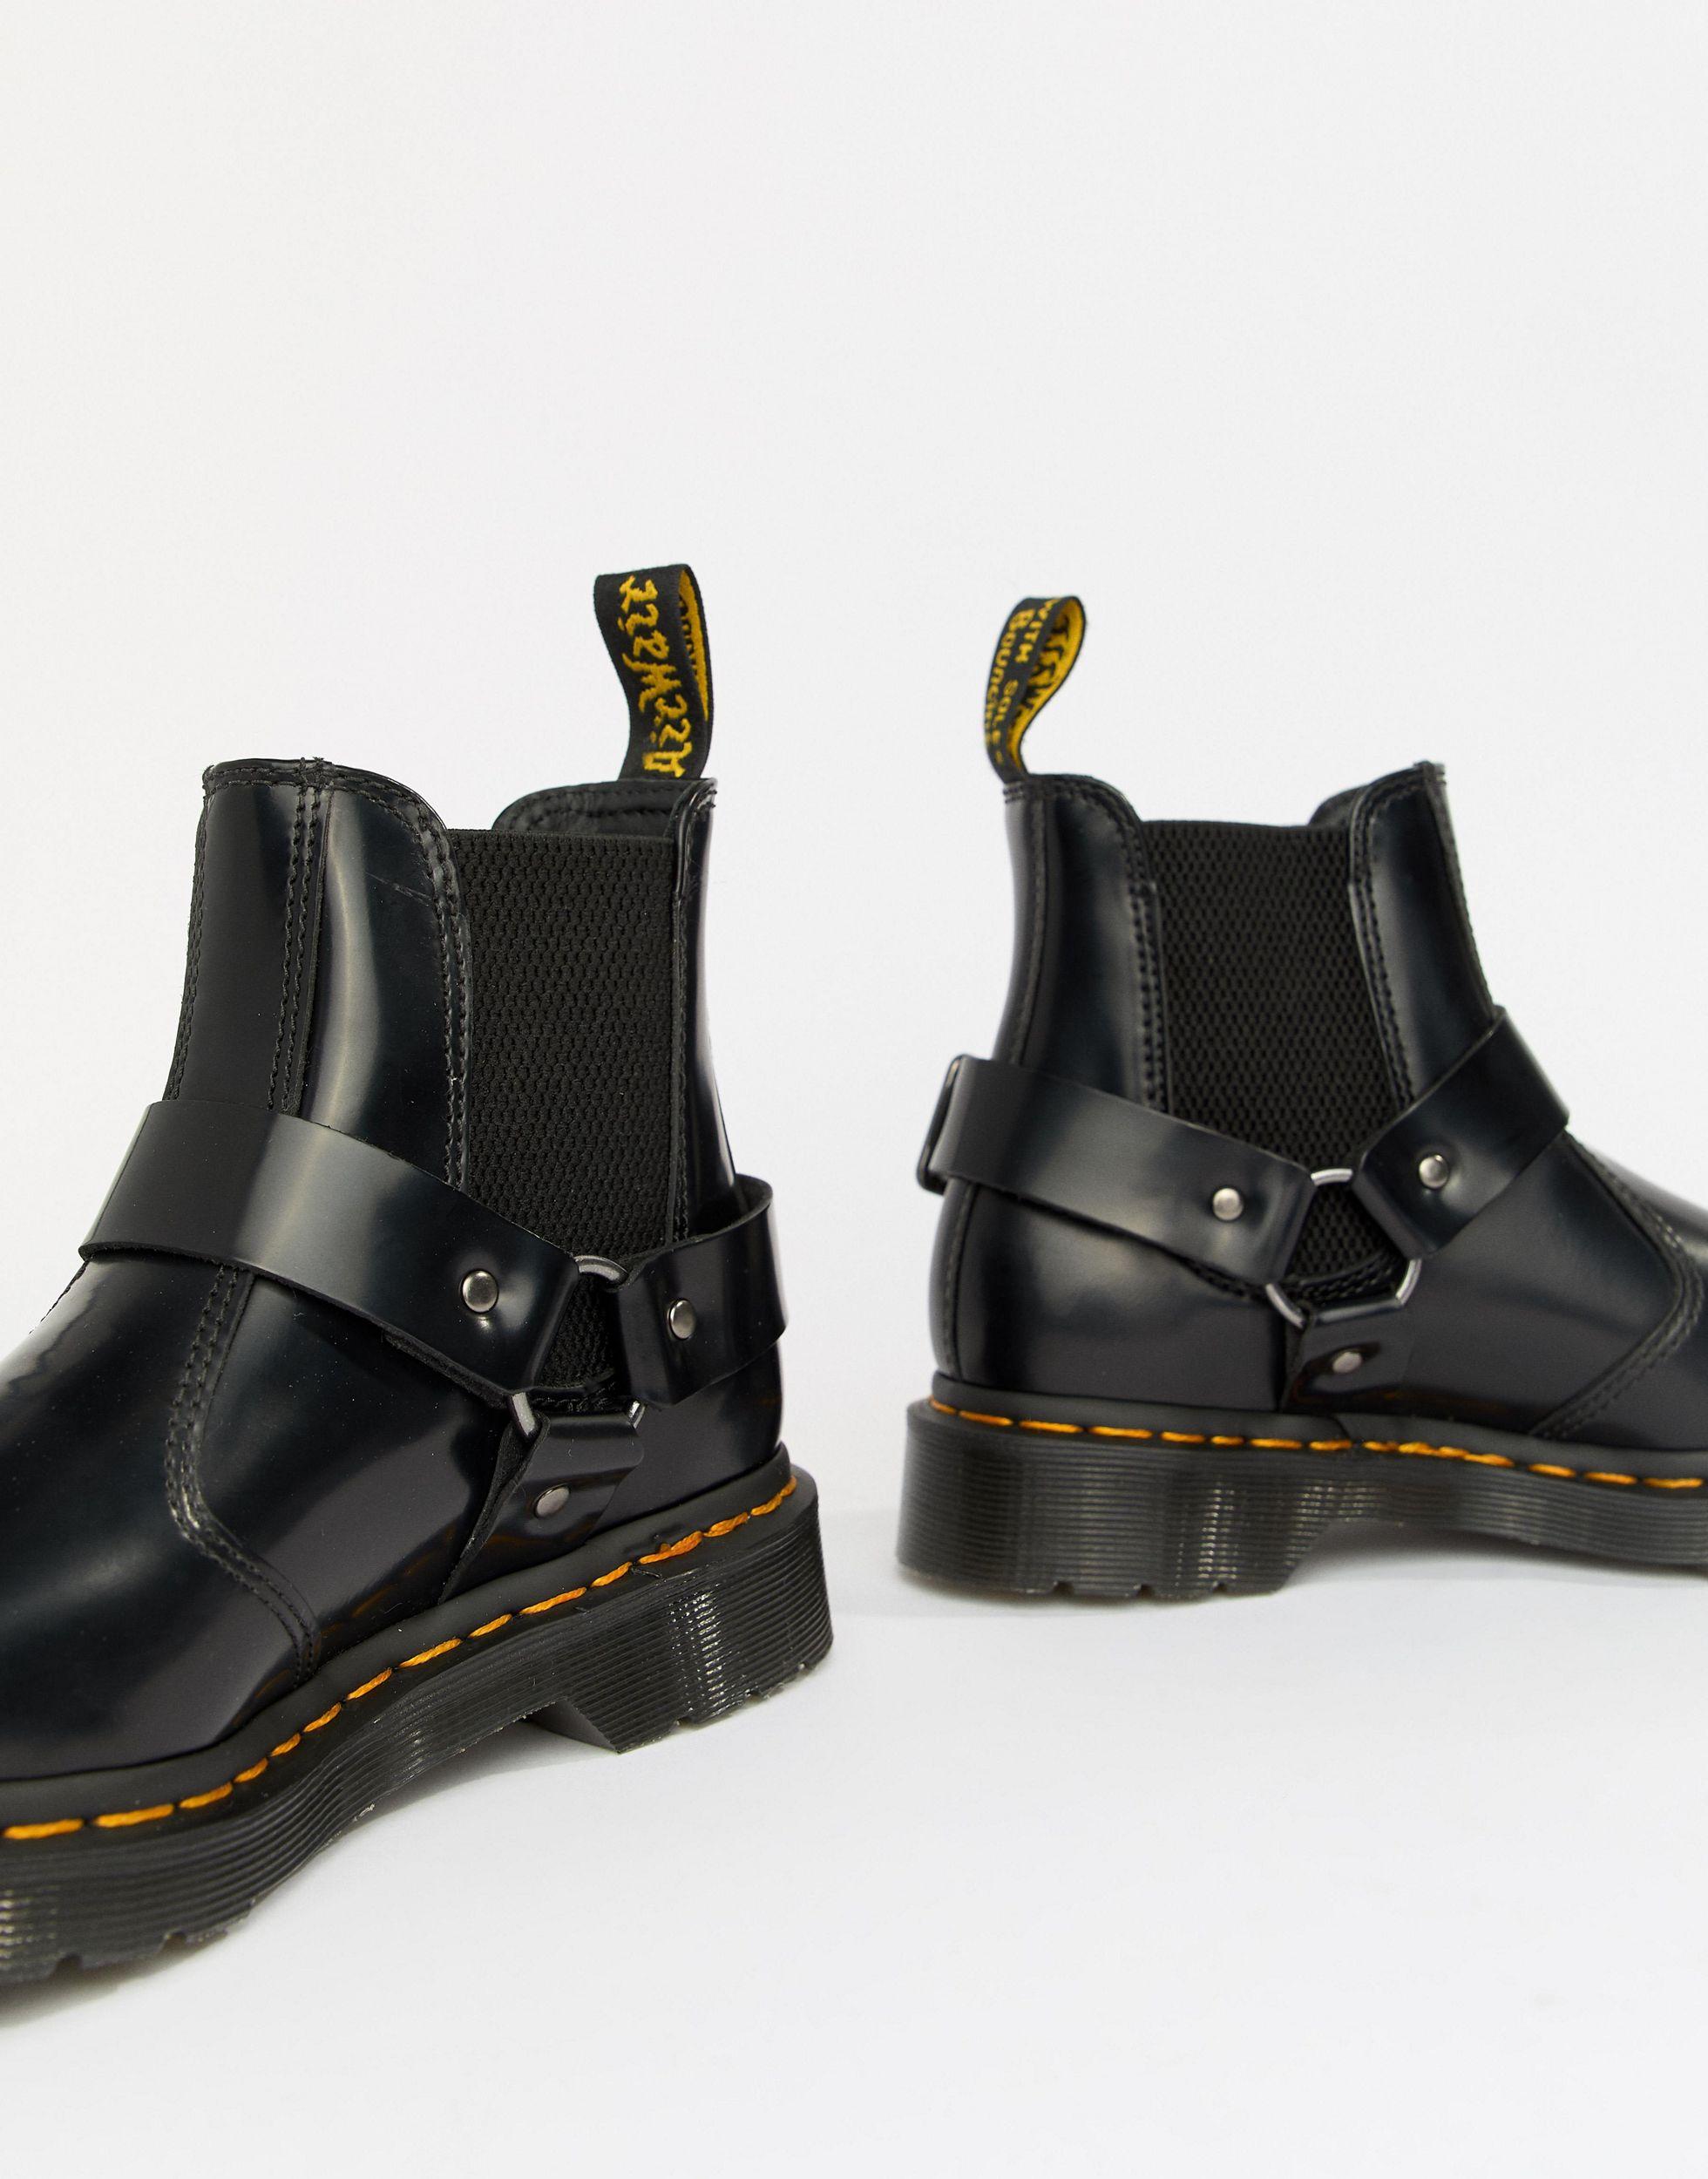 dr martens harness chelsea boots